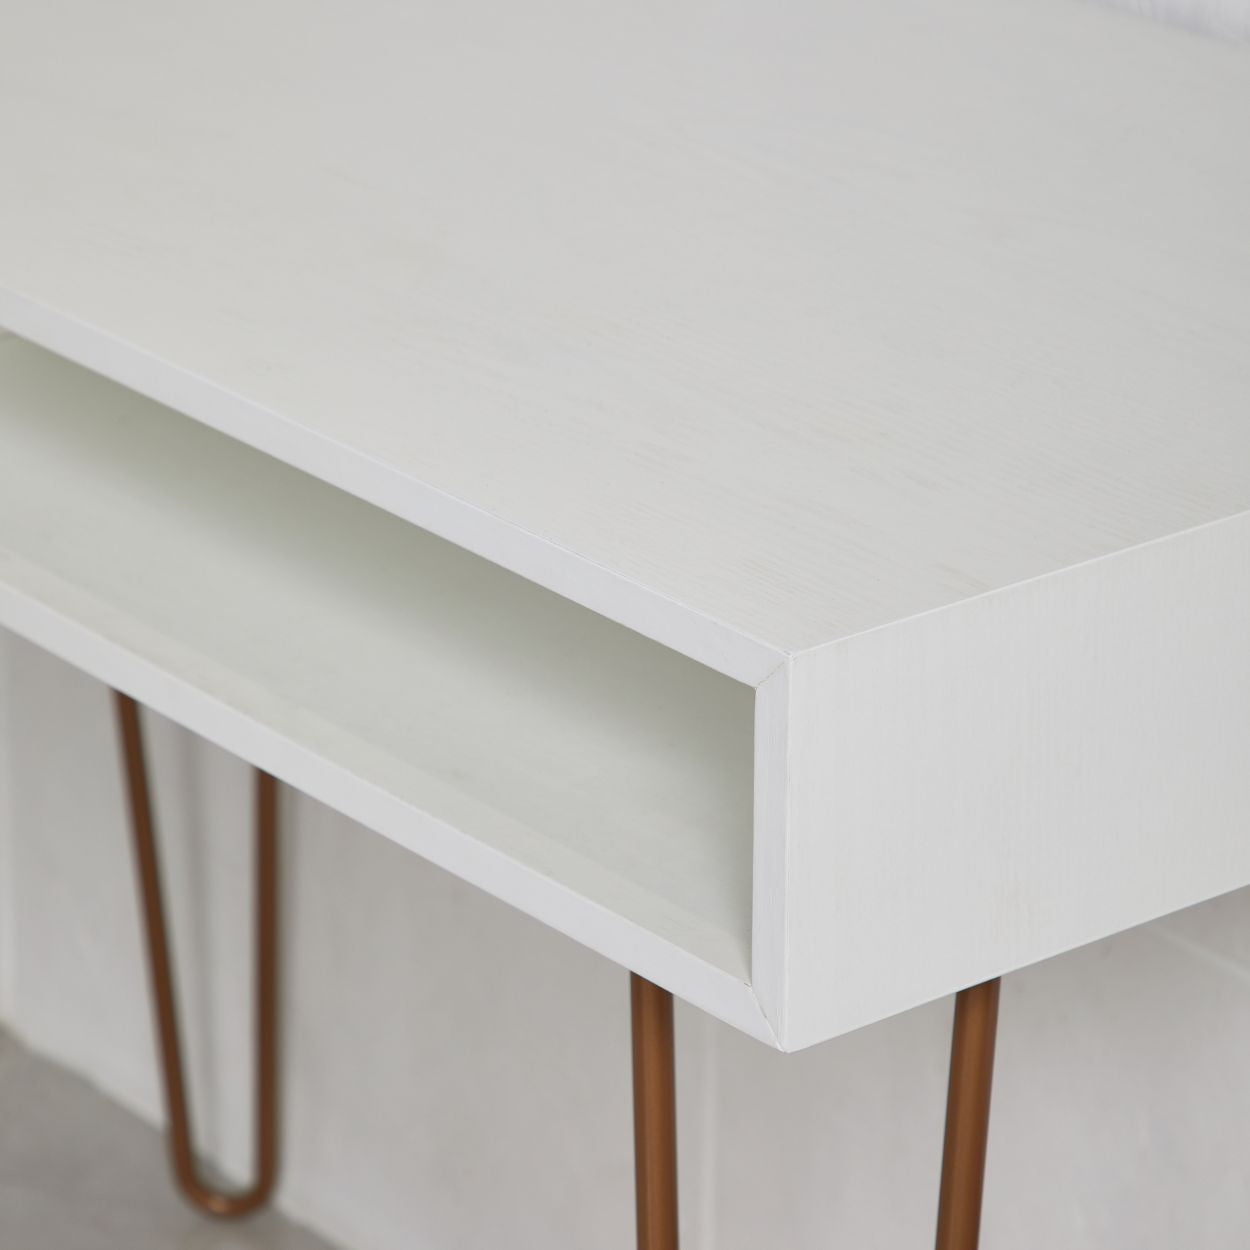 This writing desk comes with large open compartment for desk storage